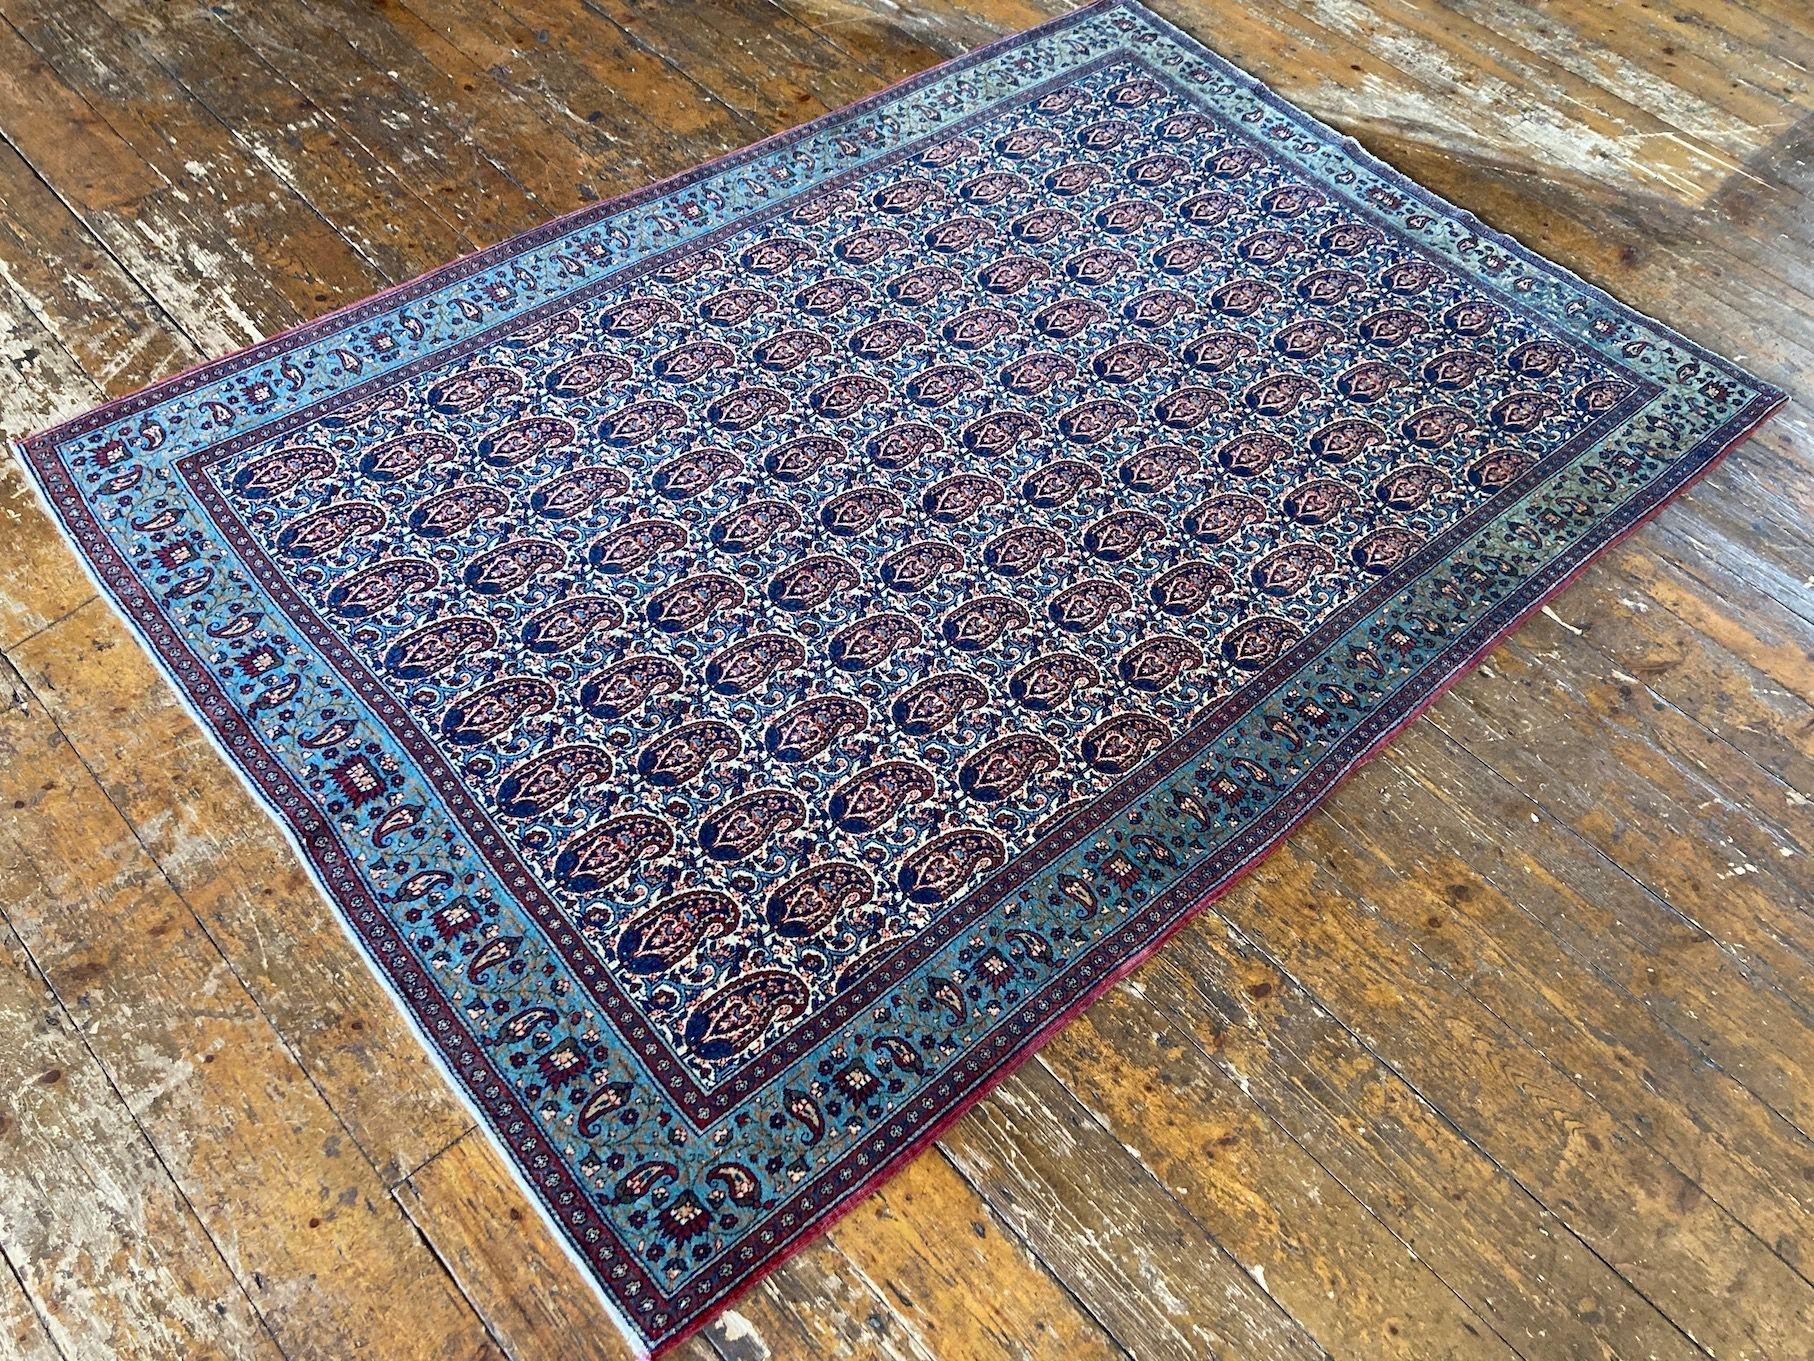 Antique Qum Rug 2.00m X 1.36m In Good Condition For Sale In St. Albans, GB